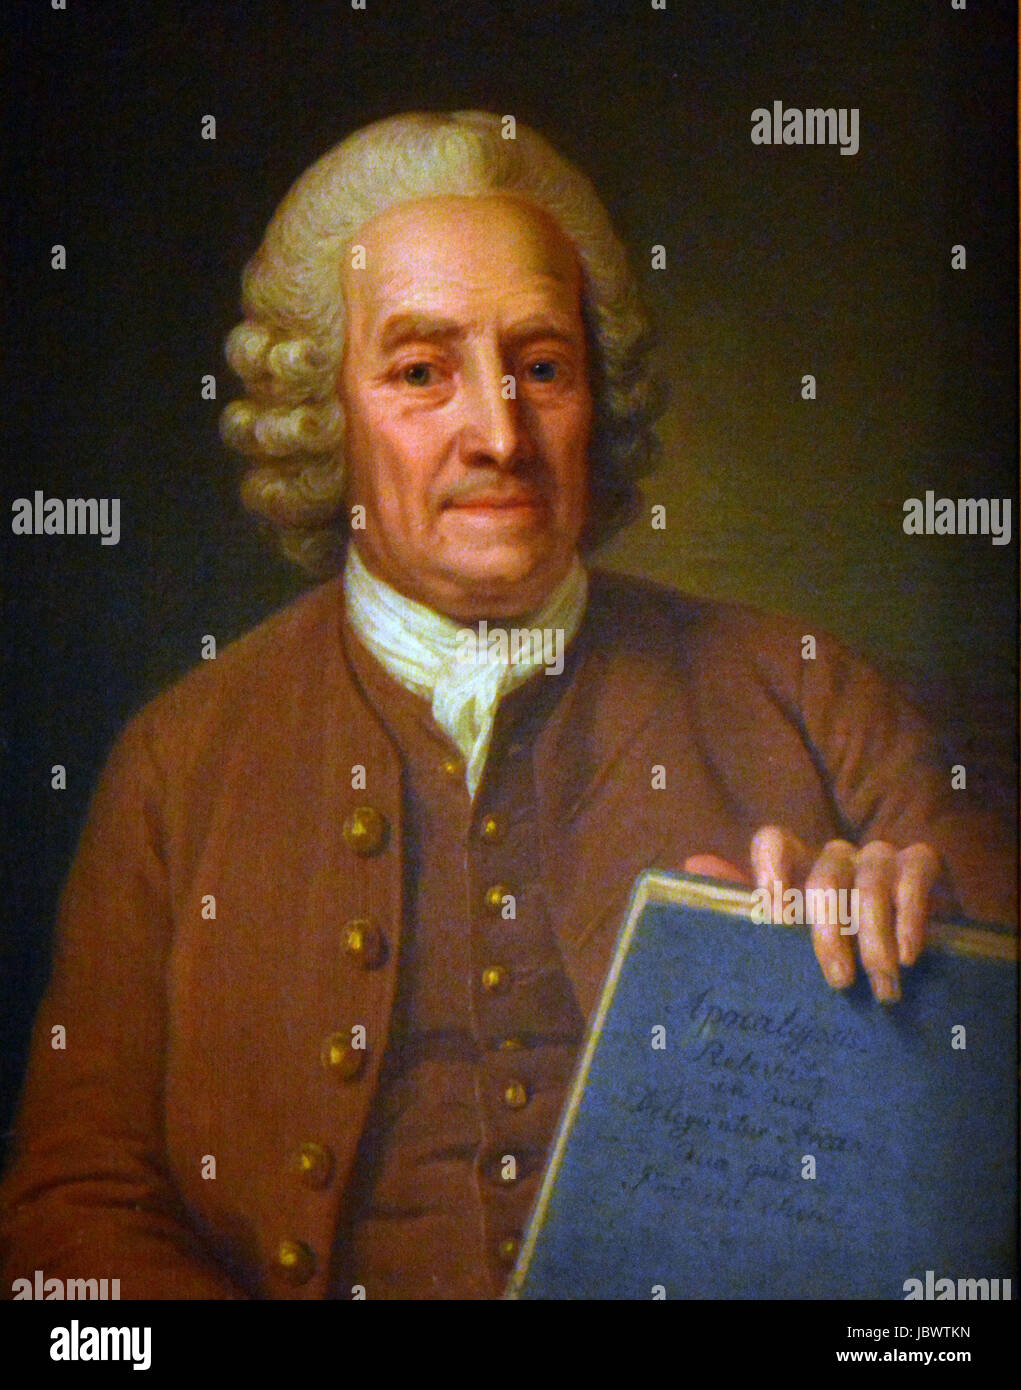 EMANUEL SWEDENBORG (1688-1772) Swedish philosopher, inventor and scientist about 1766 painted by Per Krafft the Elder Stock Photo